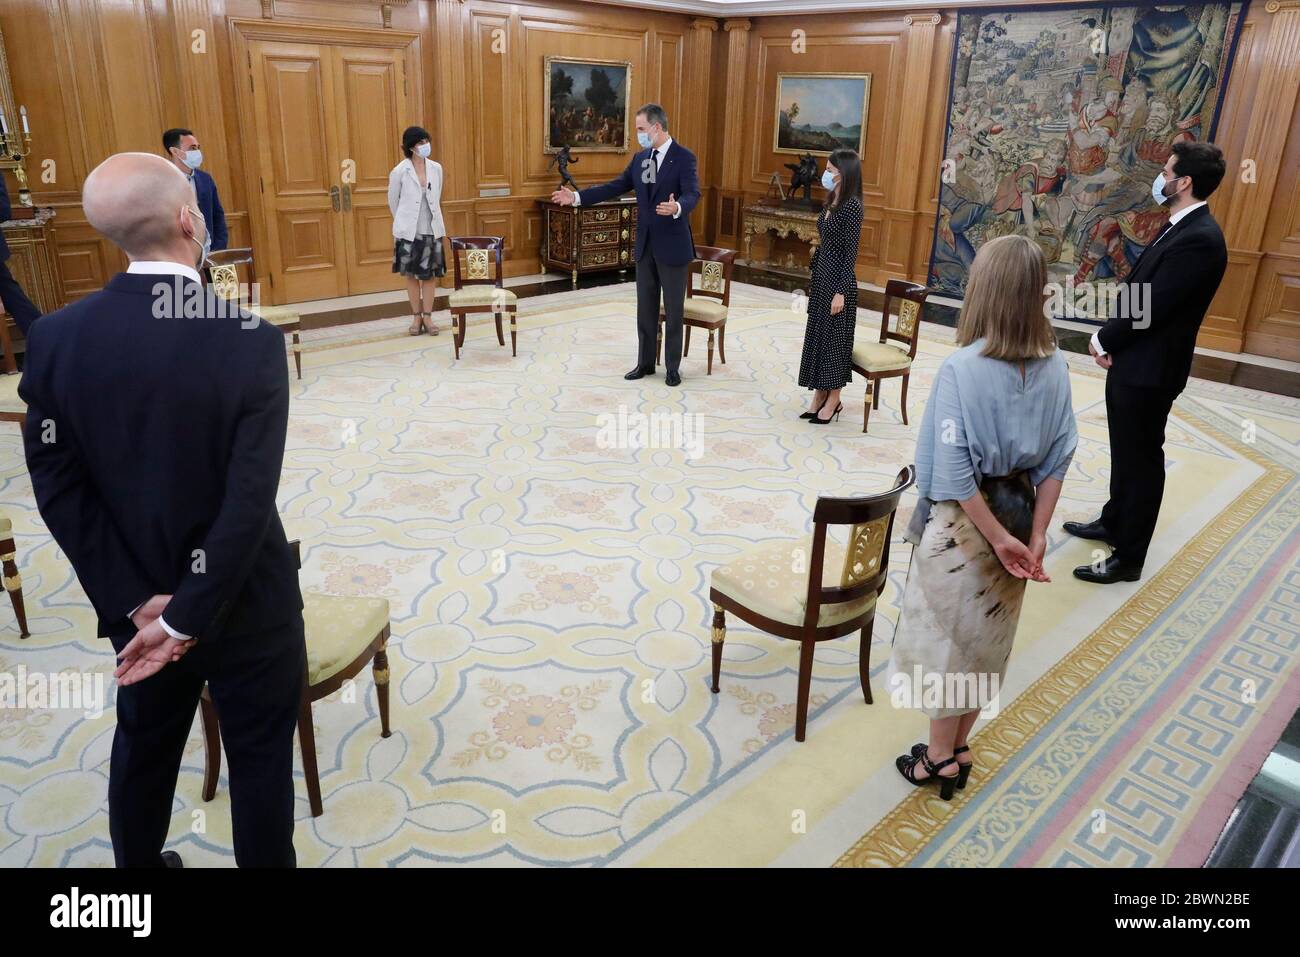 Madrid, Madrid, Spain. 2nd June, 2020. King Felipe VI of Spain, Queen Letizia of Spain attend an audience to Young Social Innovators of the Ashoka Foundation at Zarzuela Palace on June 2, 2020 in Madrid, Spain Credit: Jack Abuin/ZUMA Wire/Alamy Live News Stock Photo